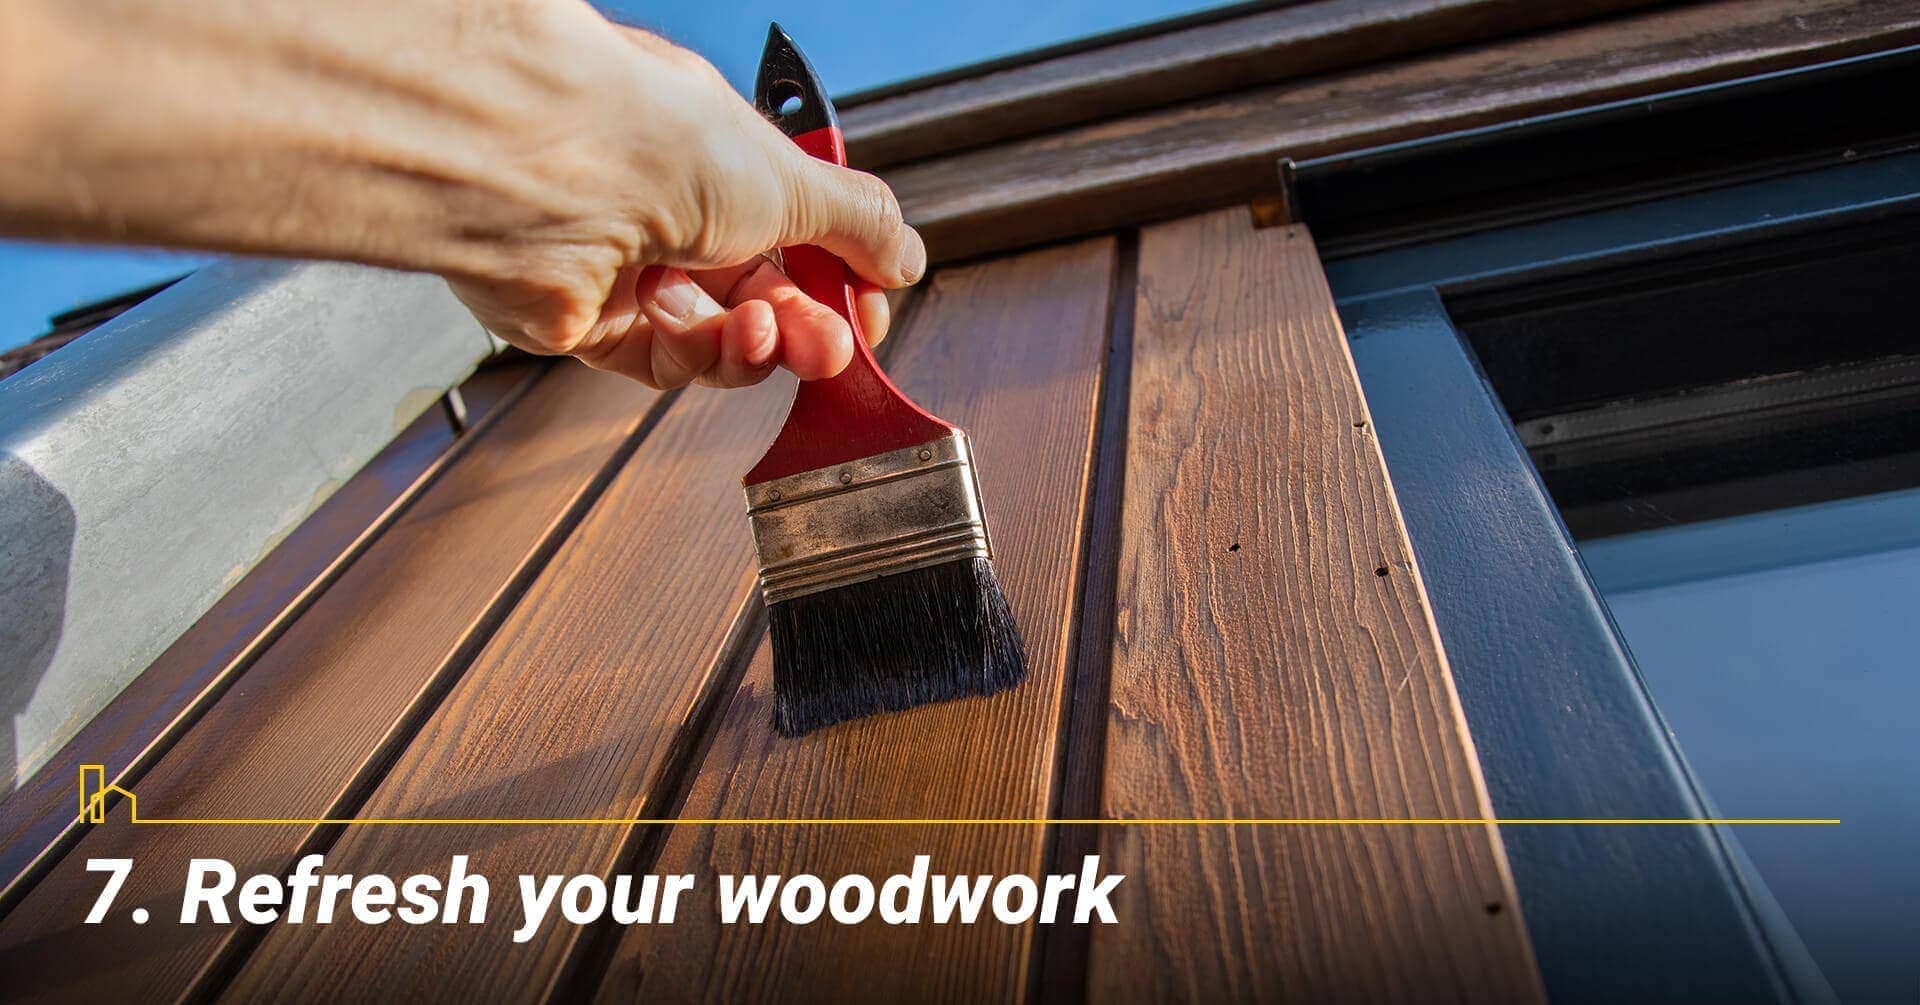 Refresh your woodwork